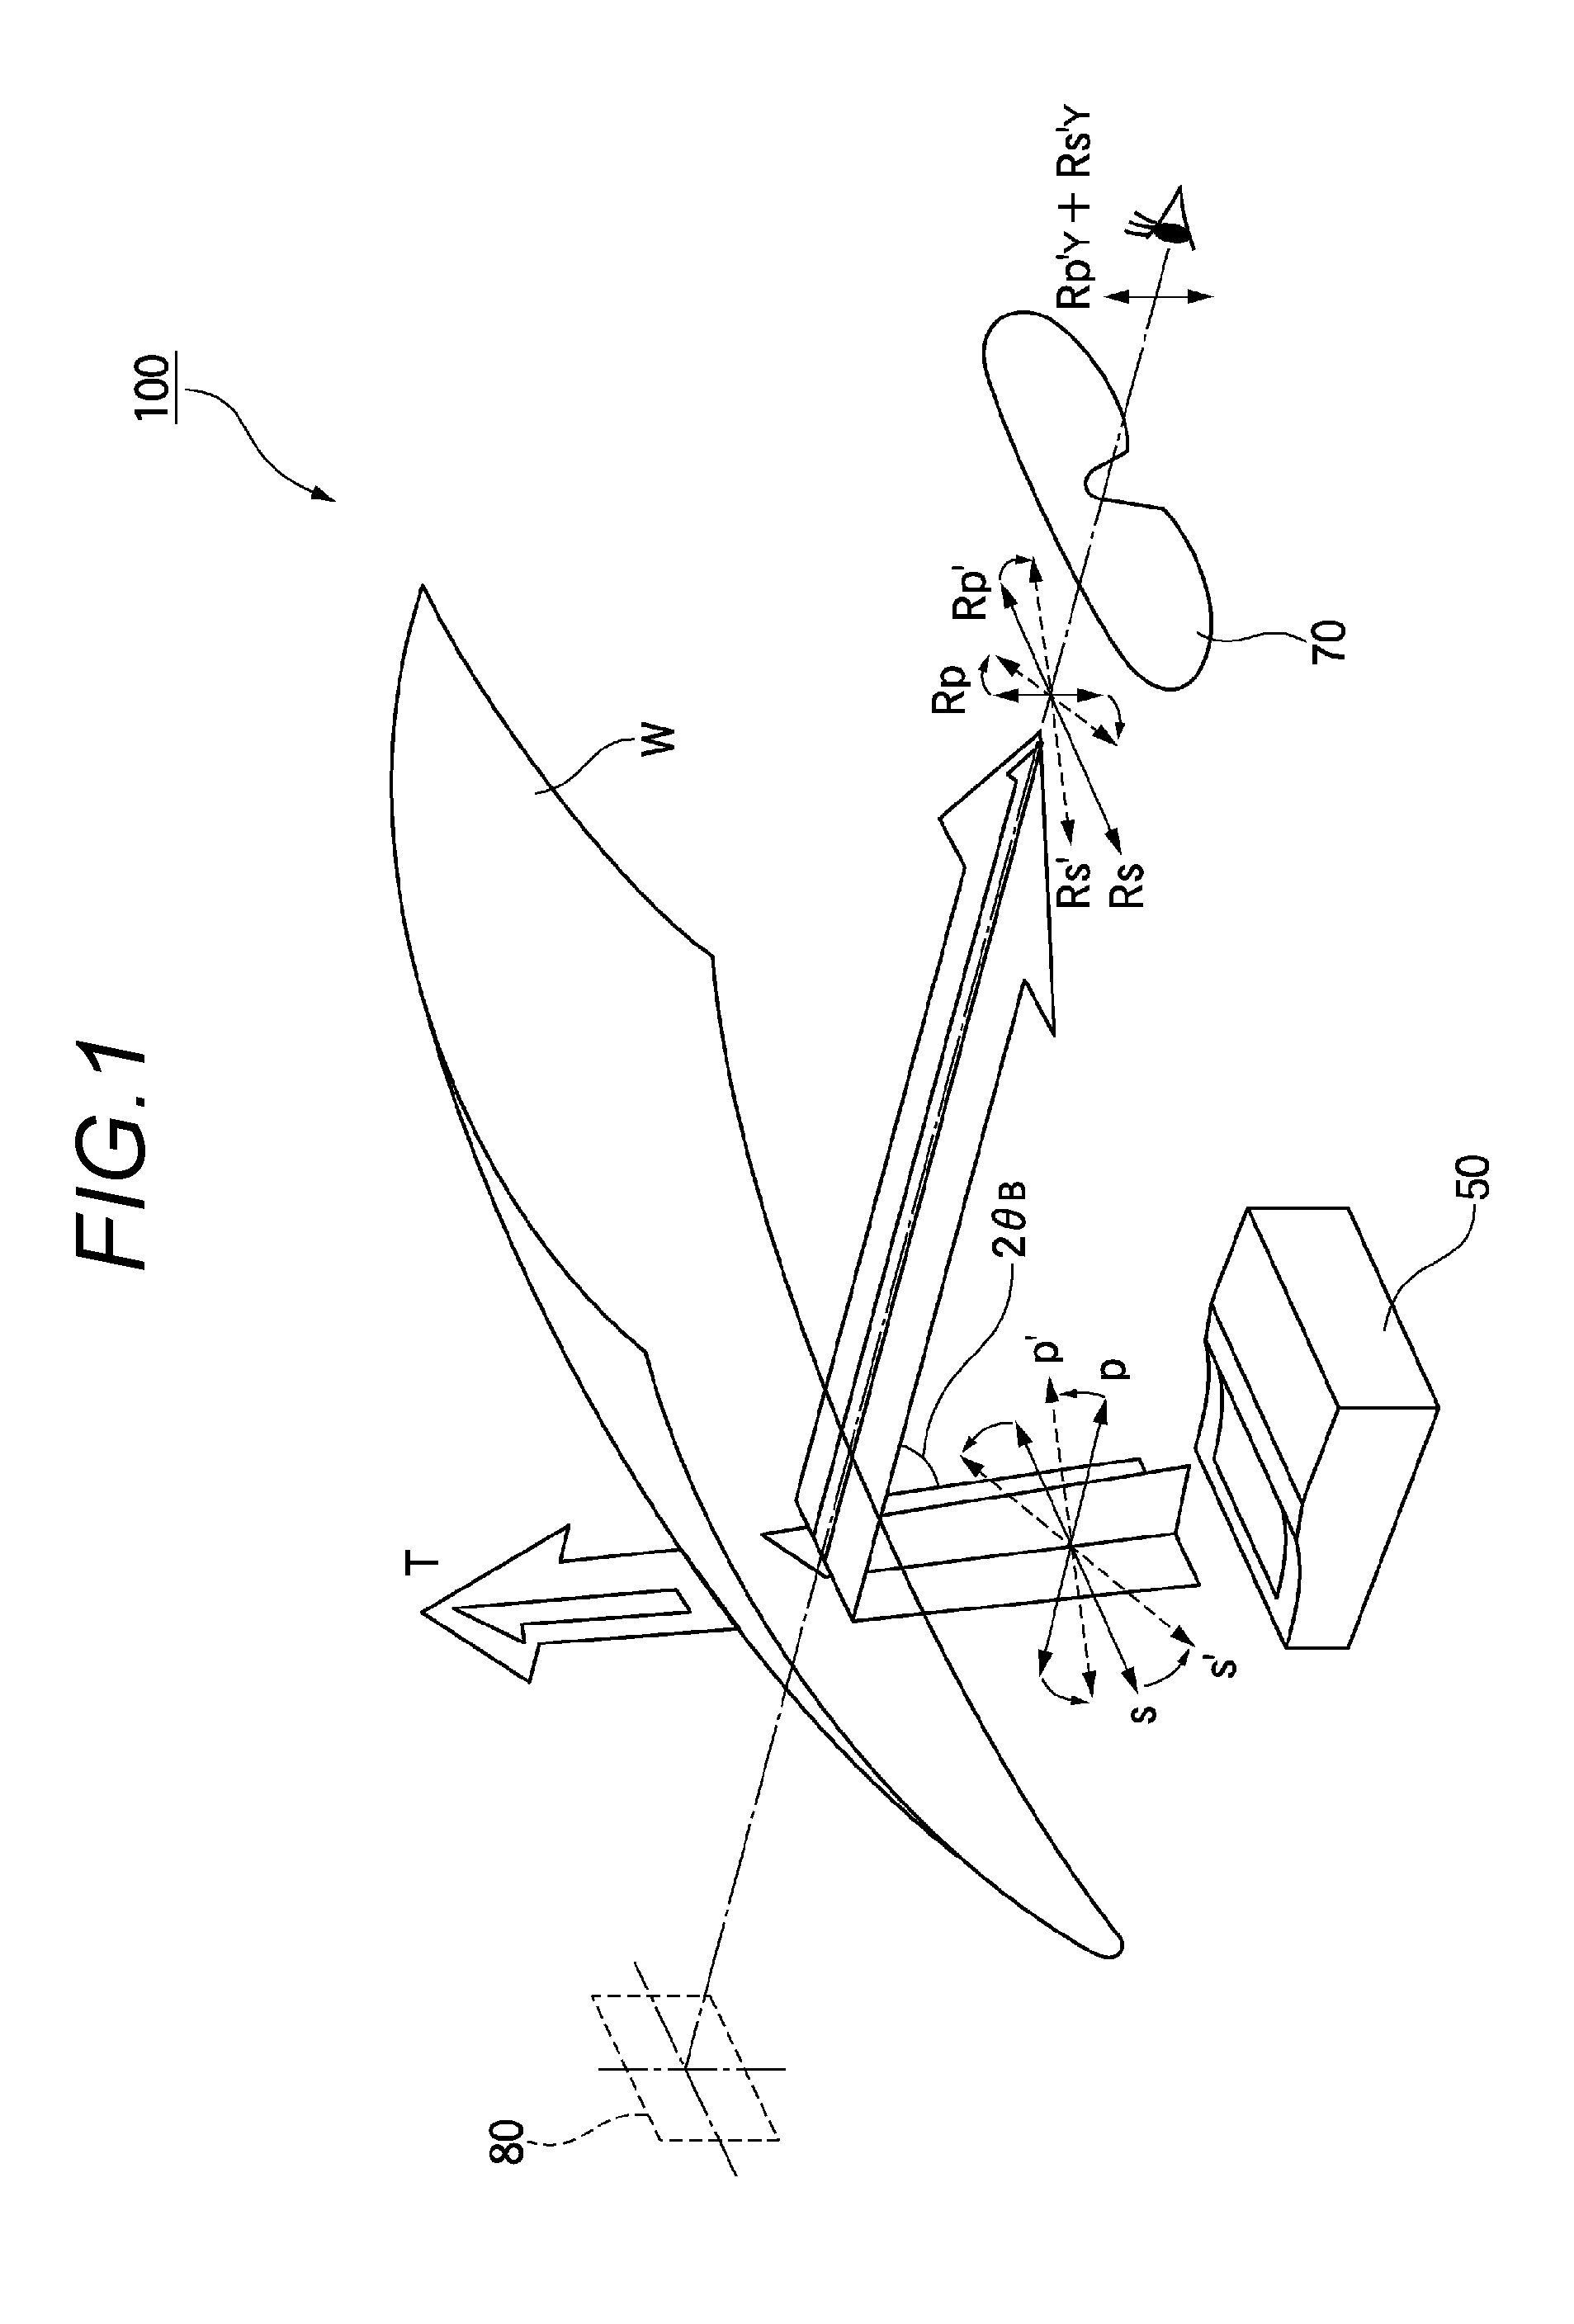 Display device for vehicle